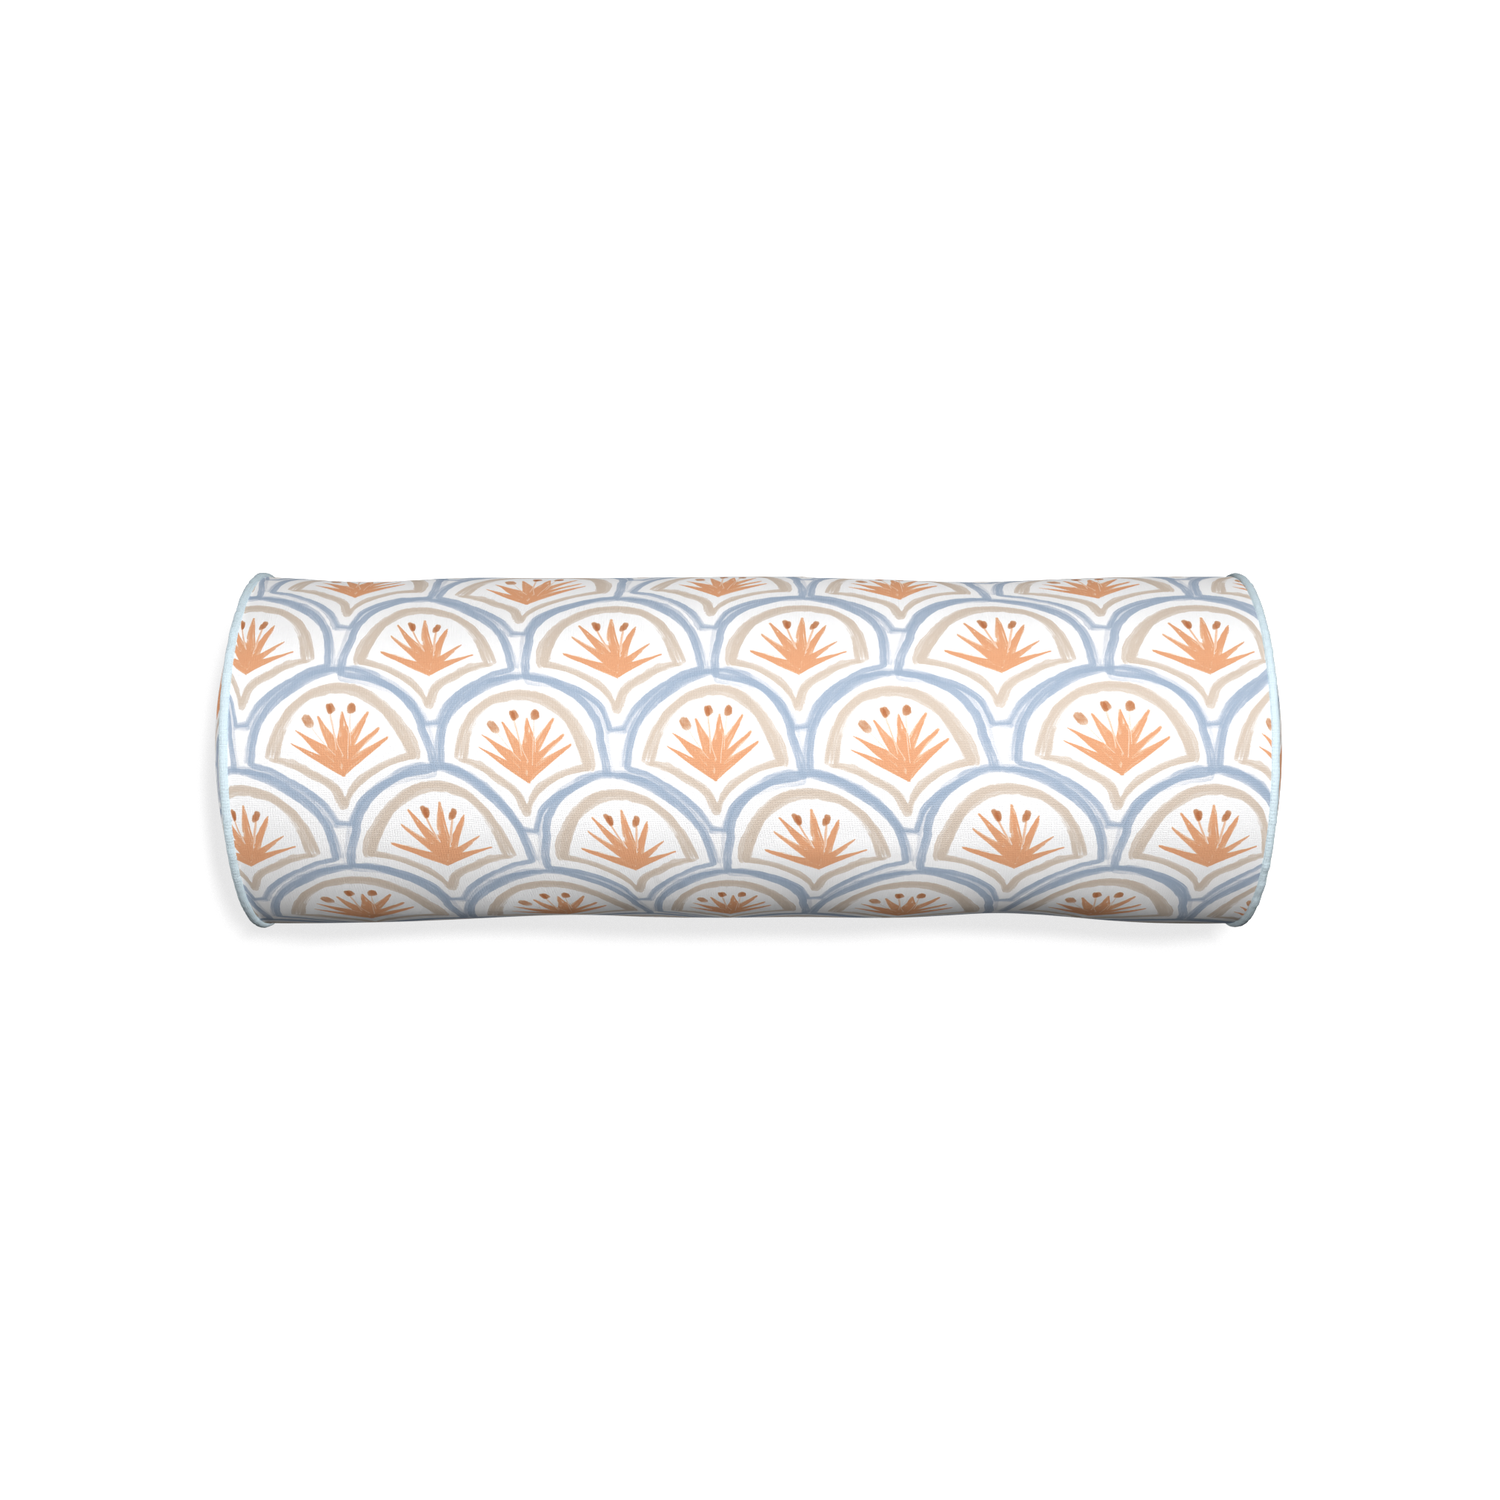 Bolster thatcher apricot custom pillow with powder piping on white background